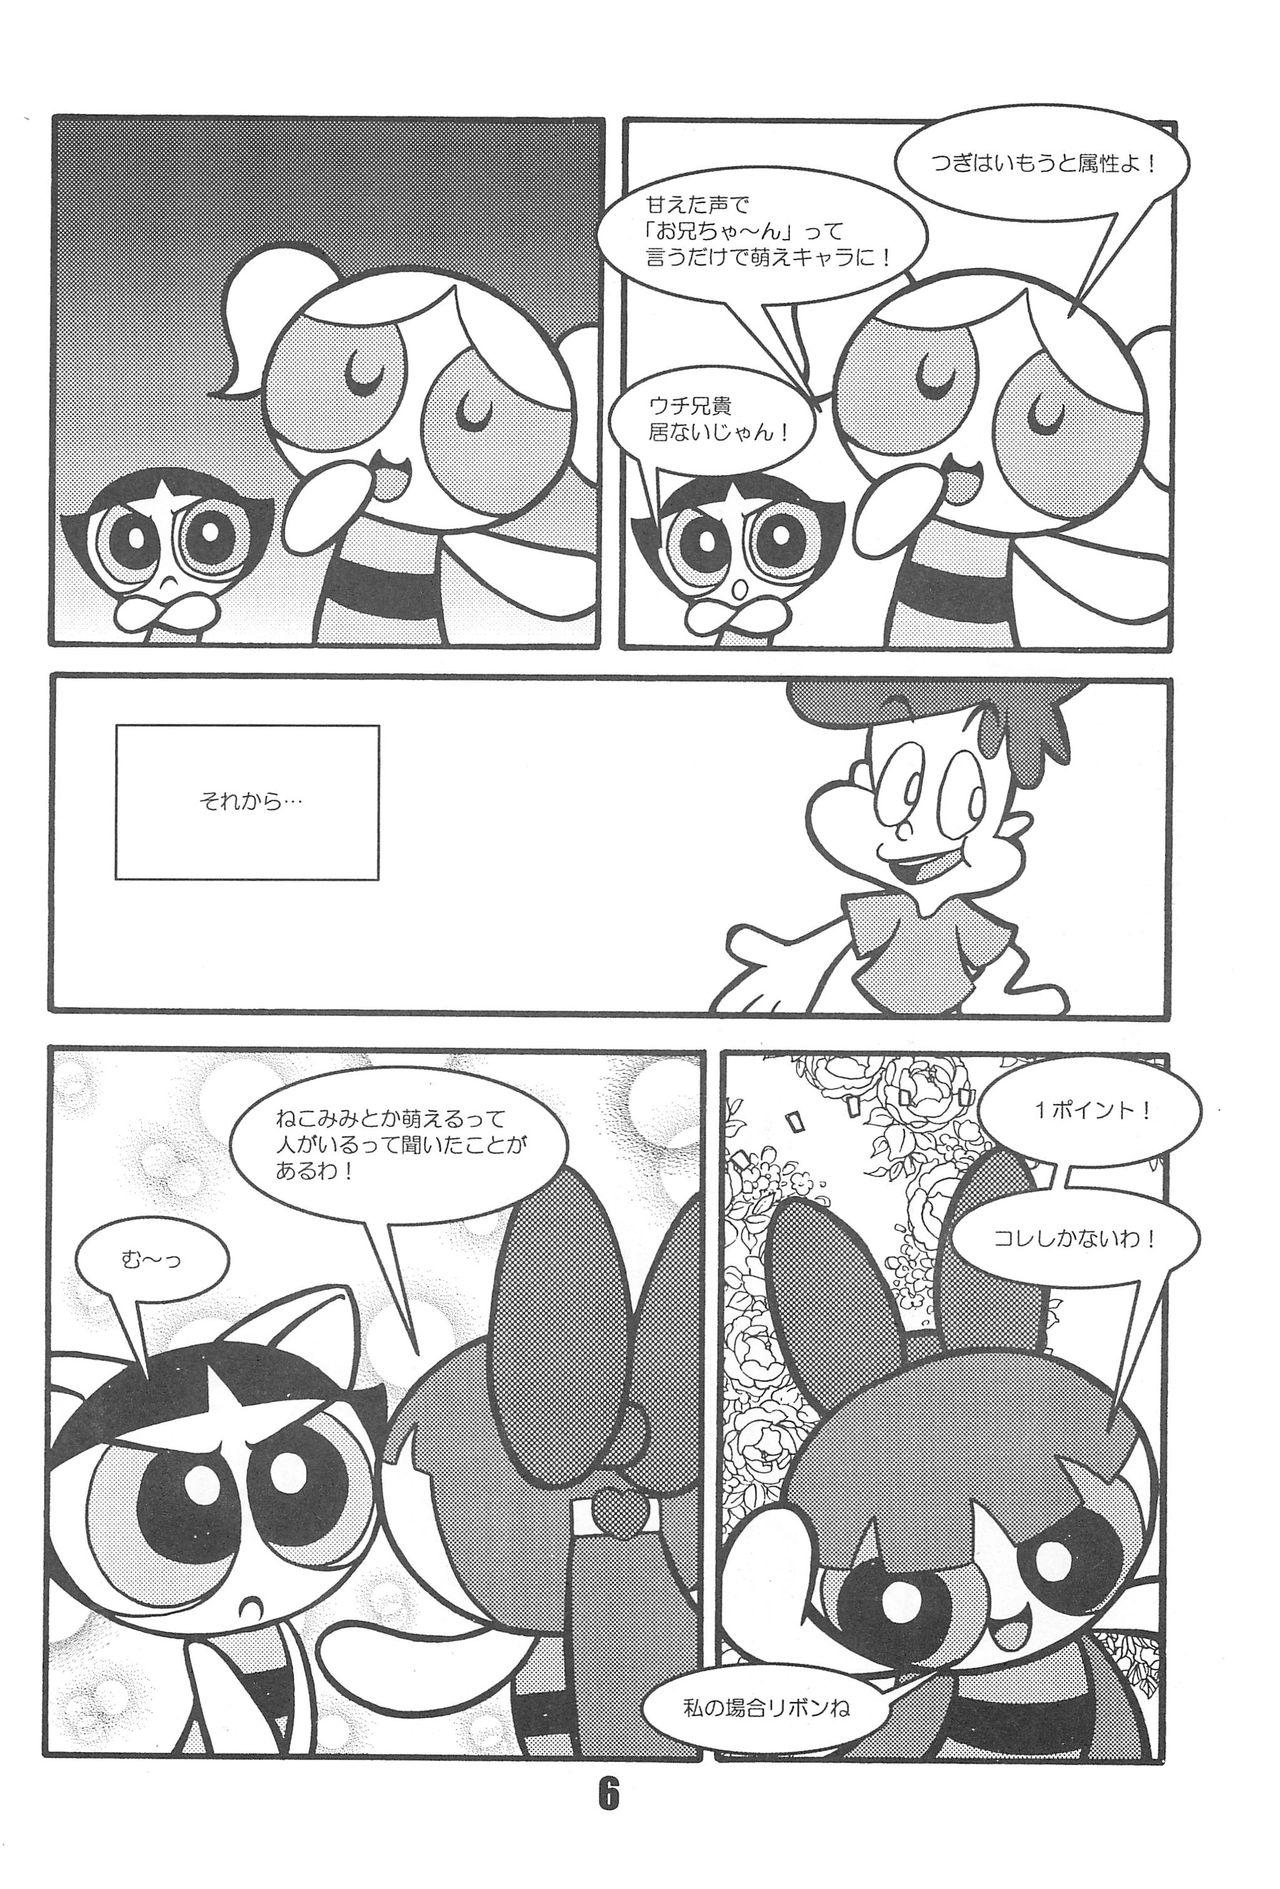 Spy Show Goes On! Funhouse 22th - The powerpuff girls Ameture Porn - Page 6